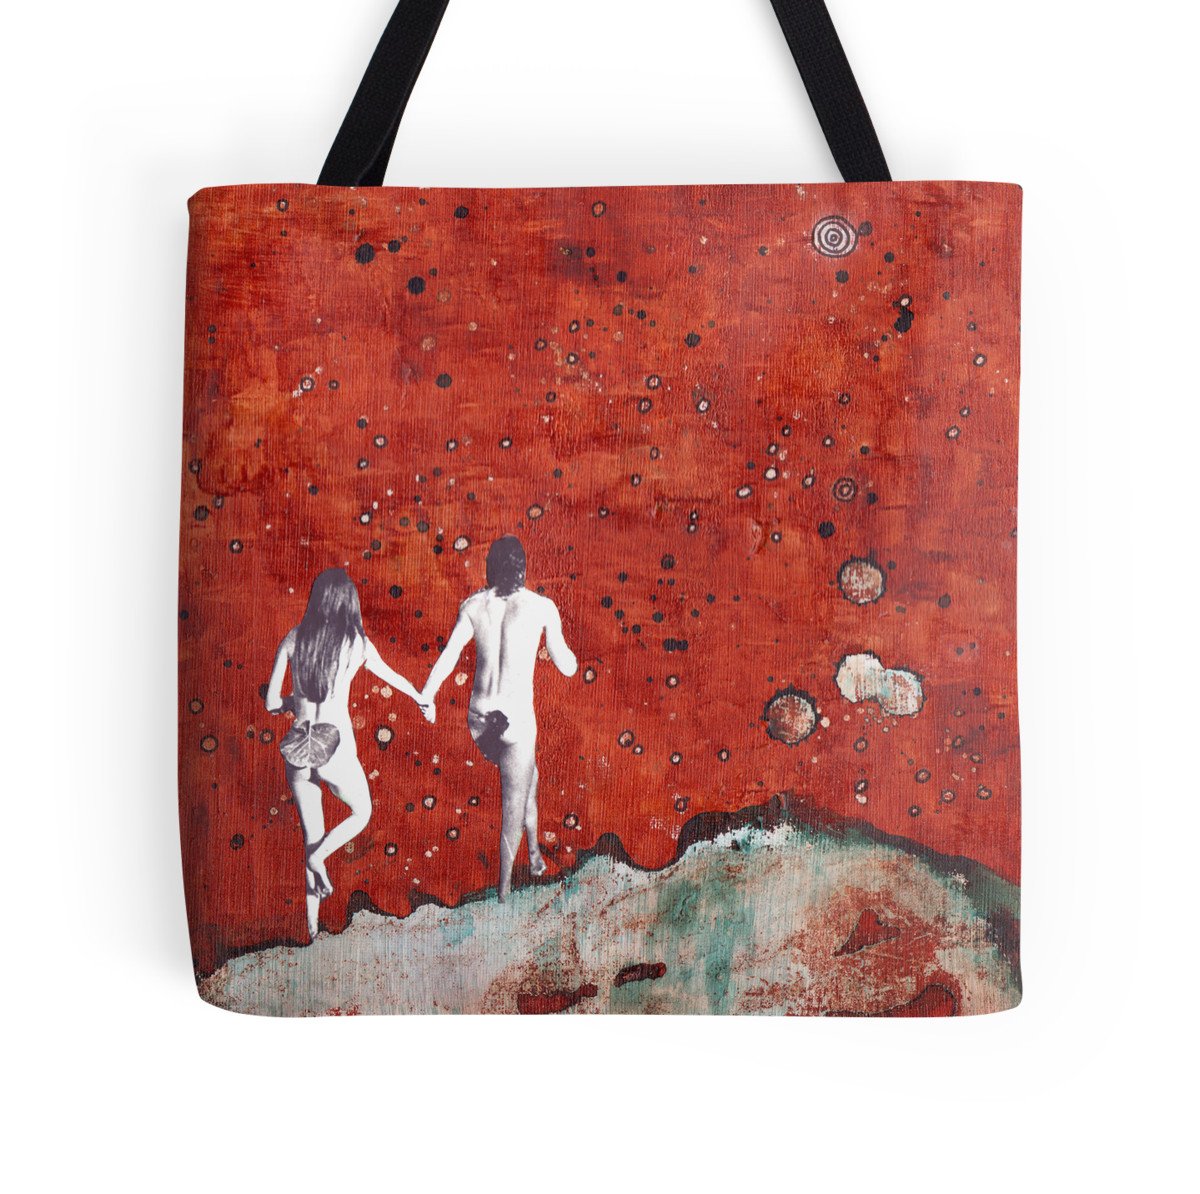 at sunst part of everything tote bag b